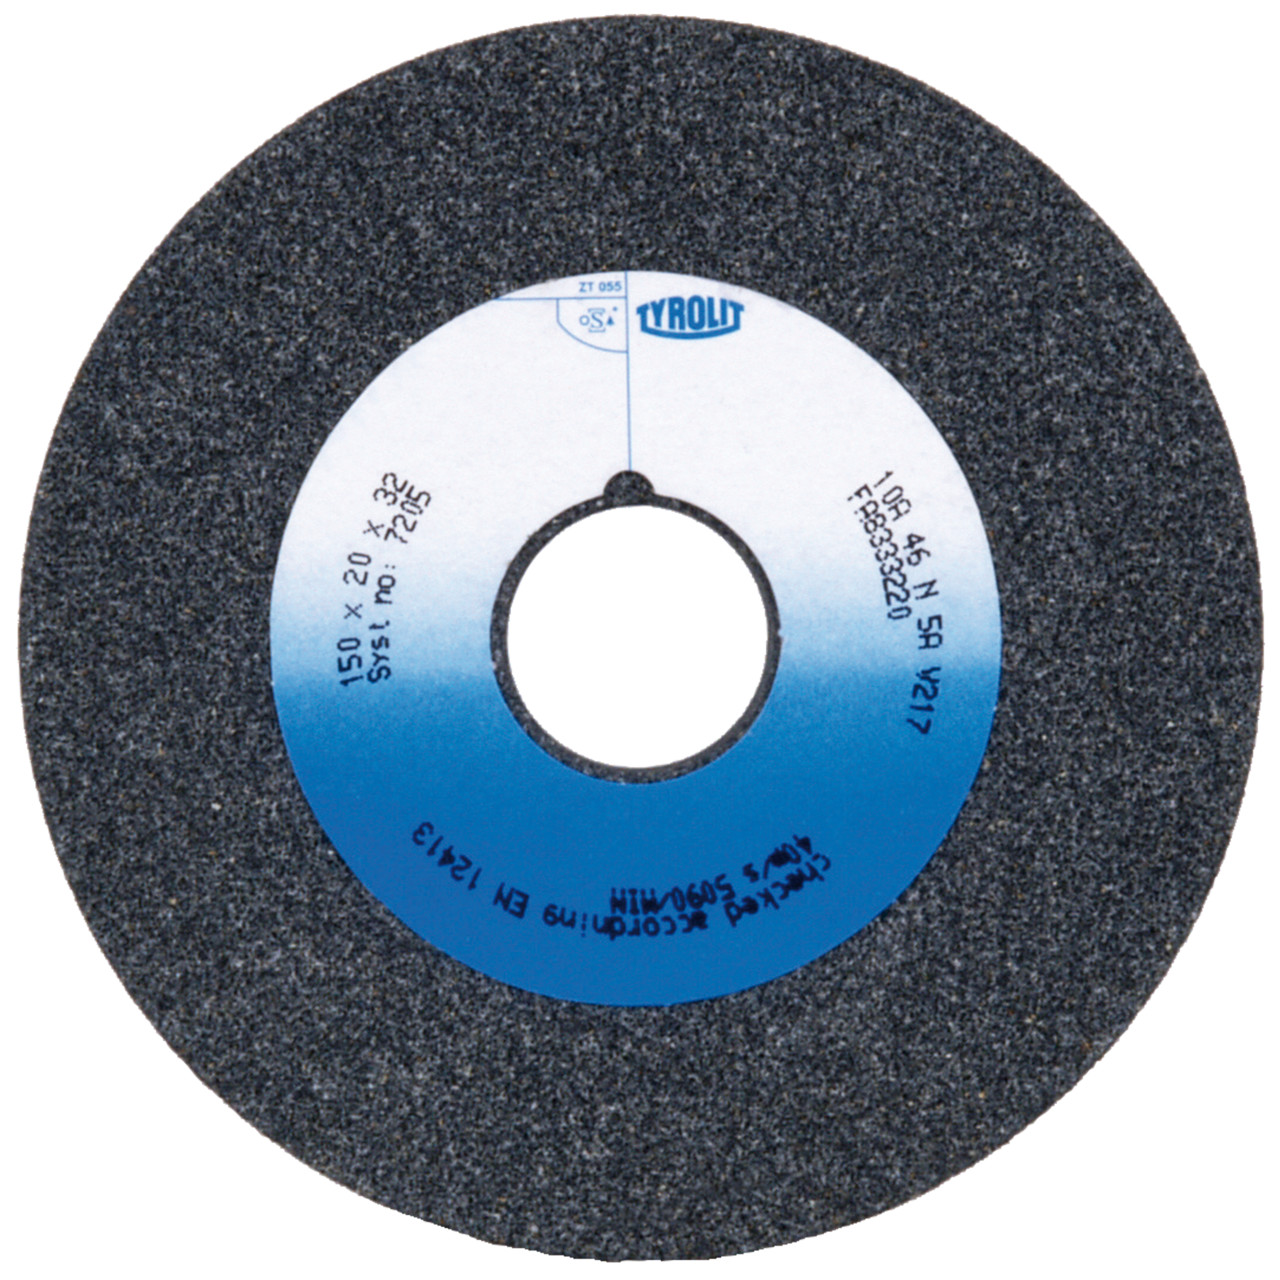 Tyrolit Conventional ceramic grinding discs DxDxH 200x25x32 For unalloyed and low-alloy steels, shape: 1, Art. 146910